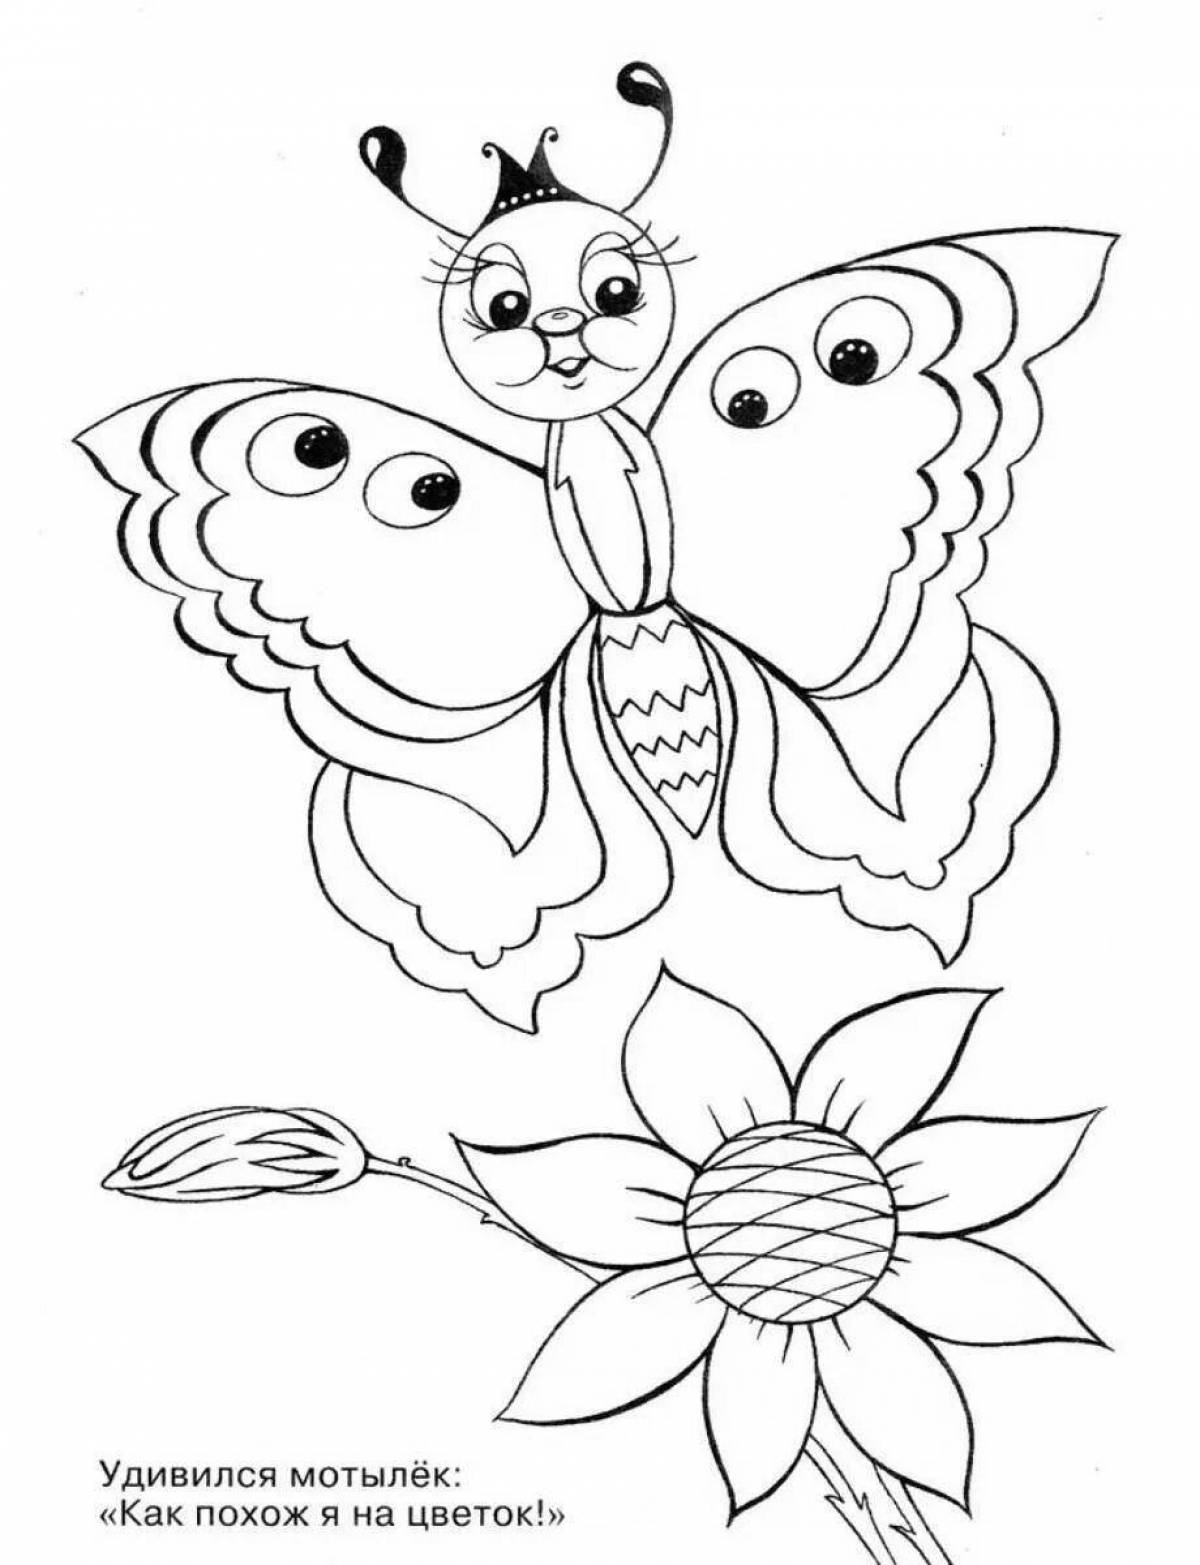 Coloring pages with joyful insects for children 5-6 years old